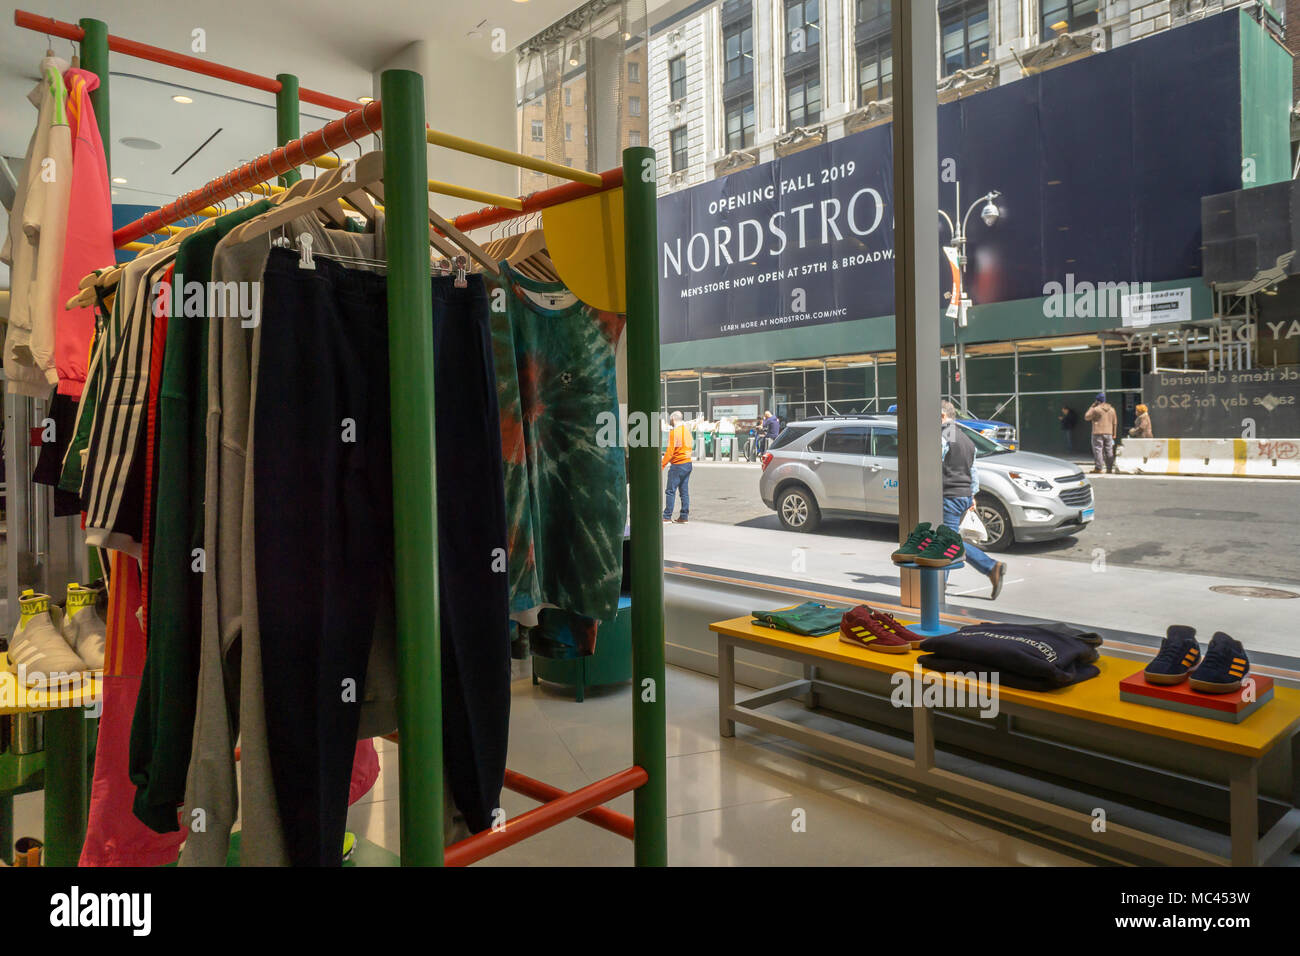 Nordstrom opens first men's store, its first location in Manhattan